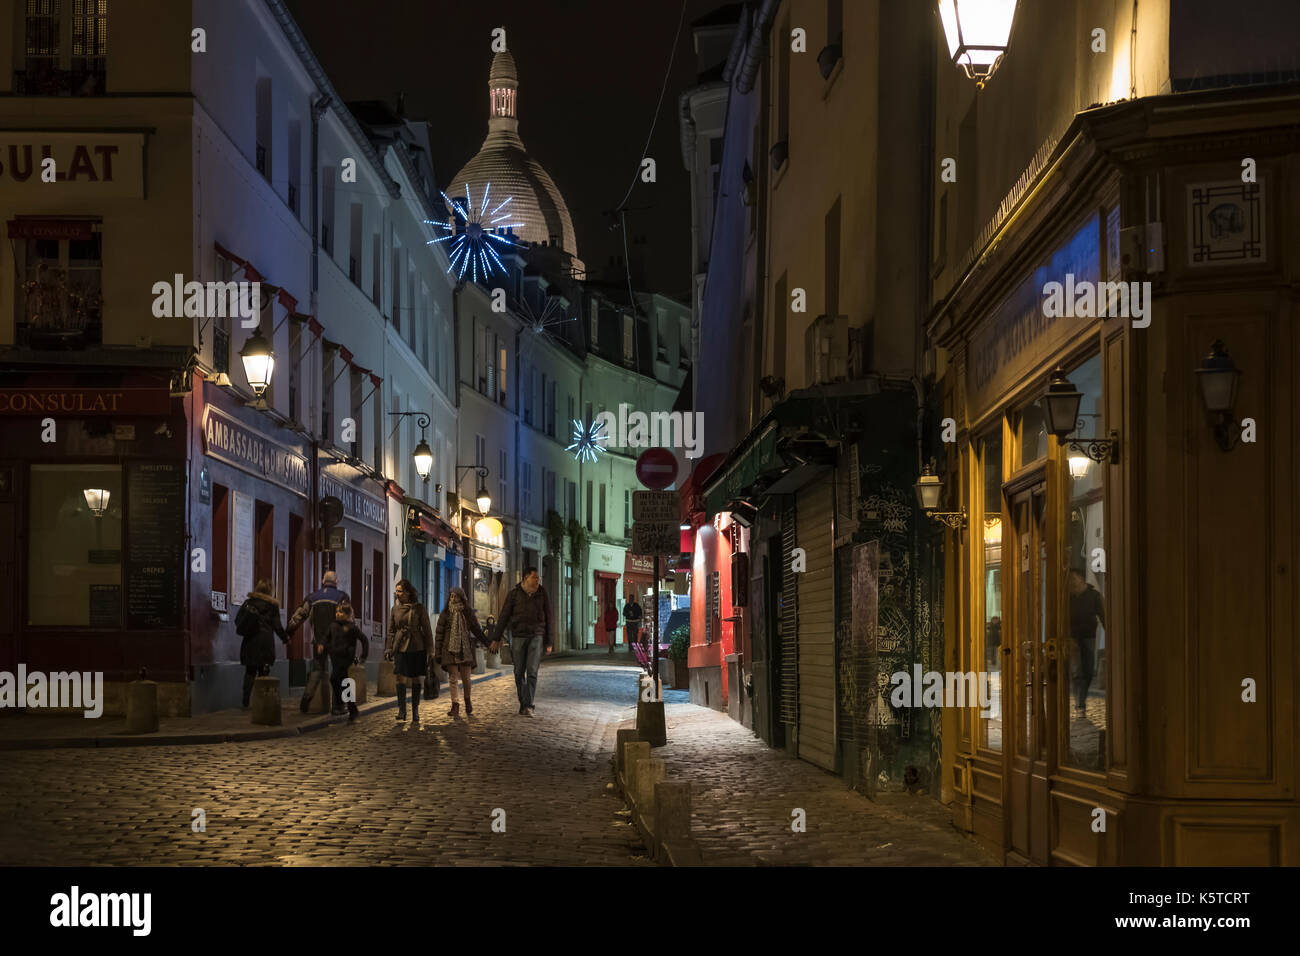 Tourists walking in a small picturesque street in Montmartre in Paris on Christmas evening with beautiful lights. Stock Photo